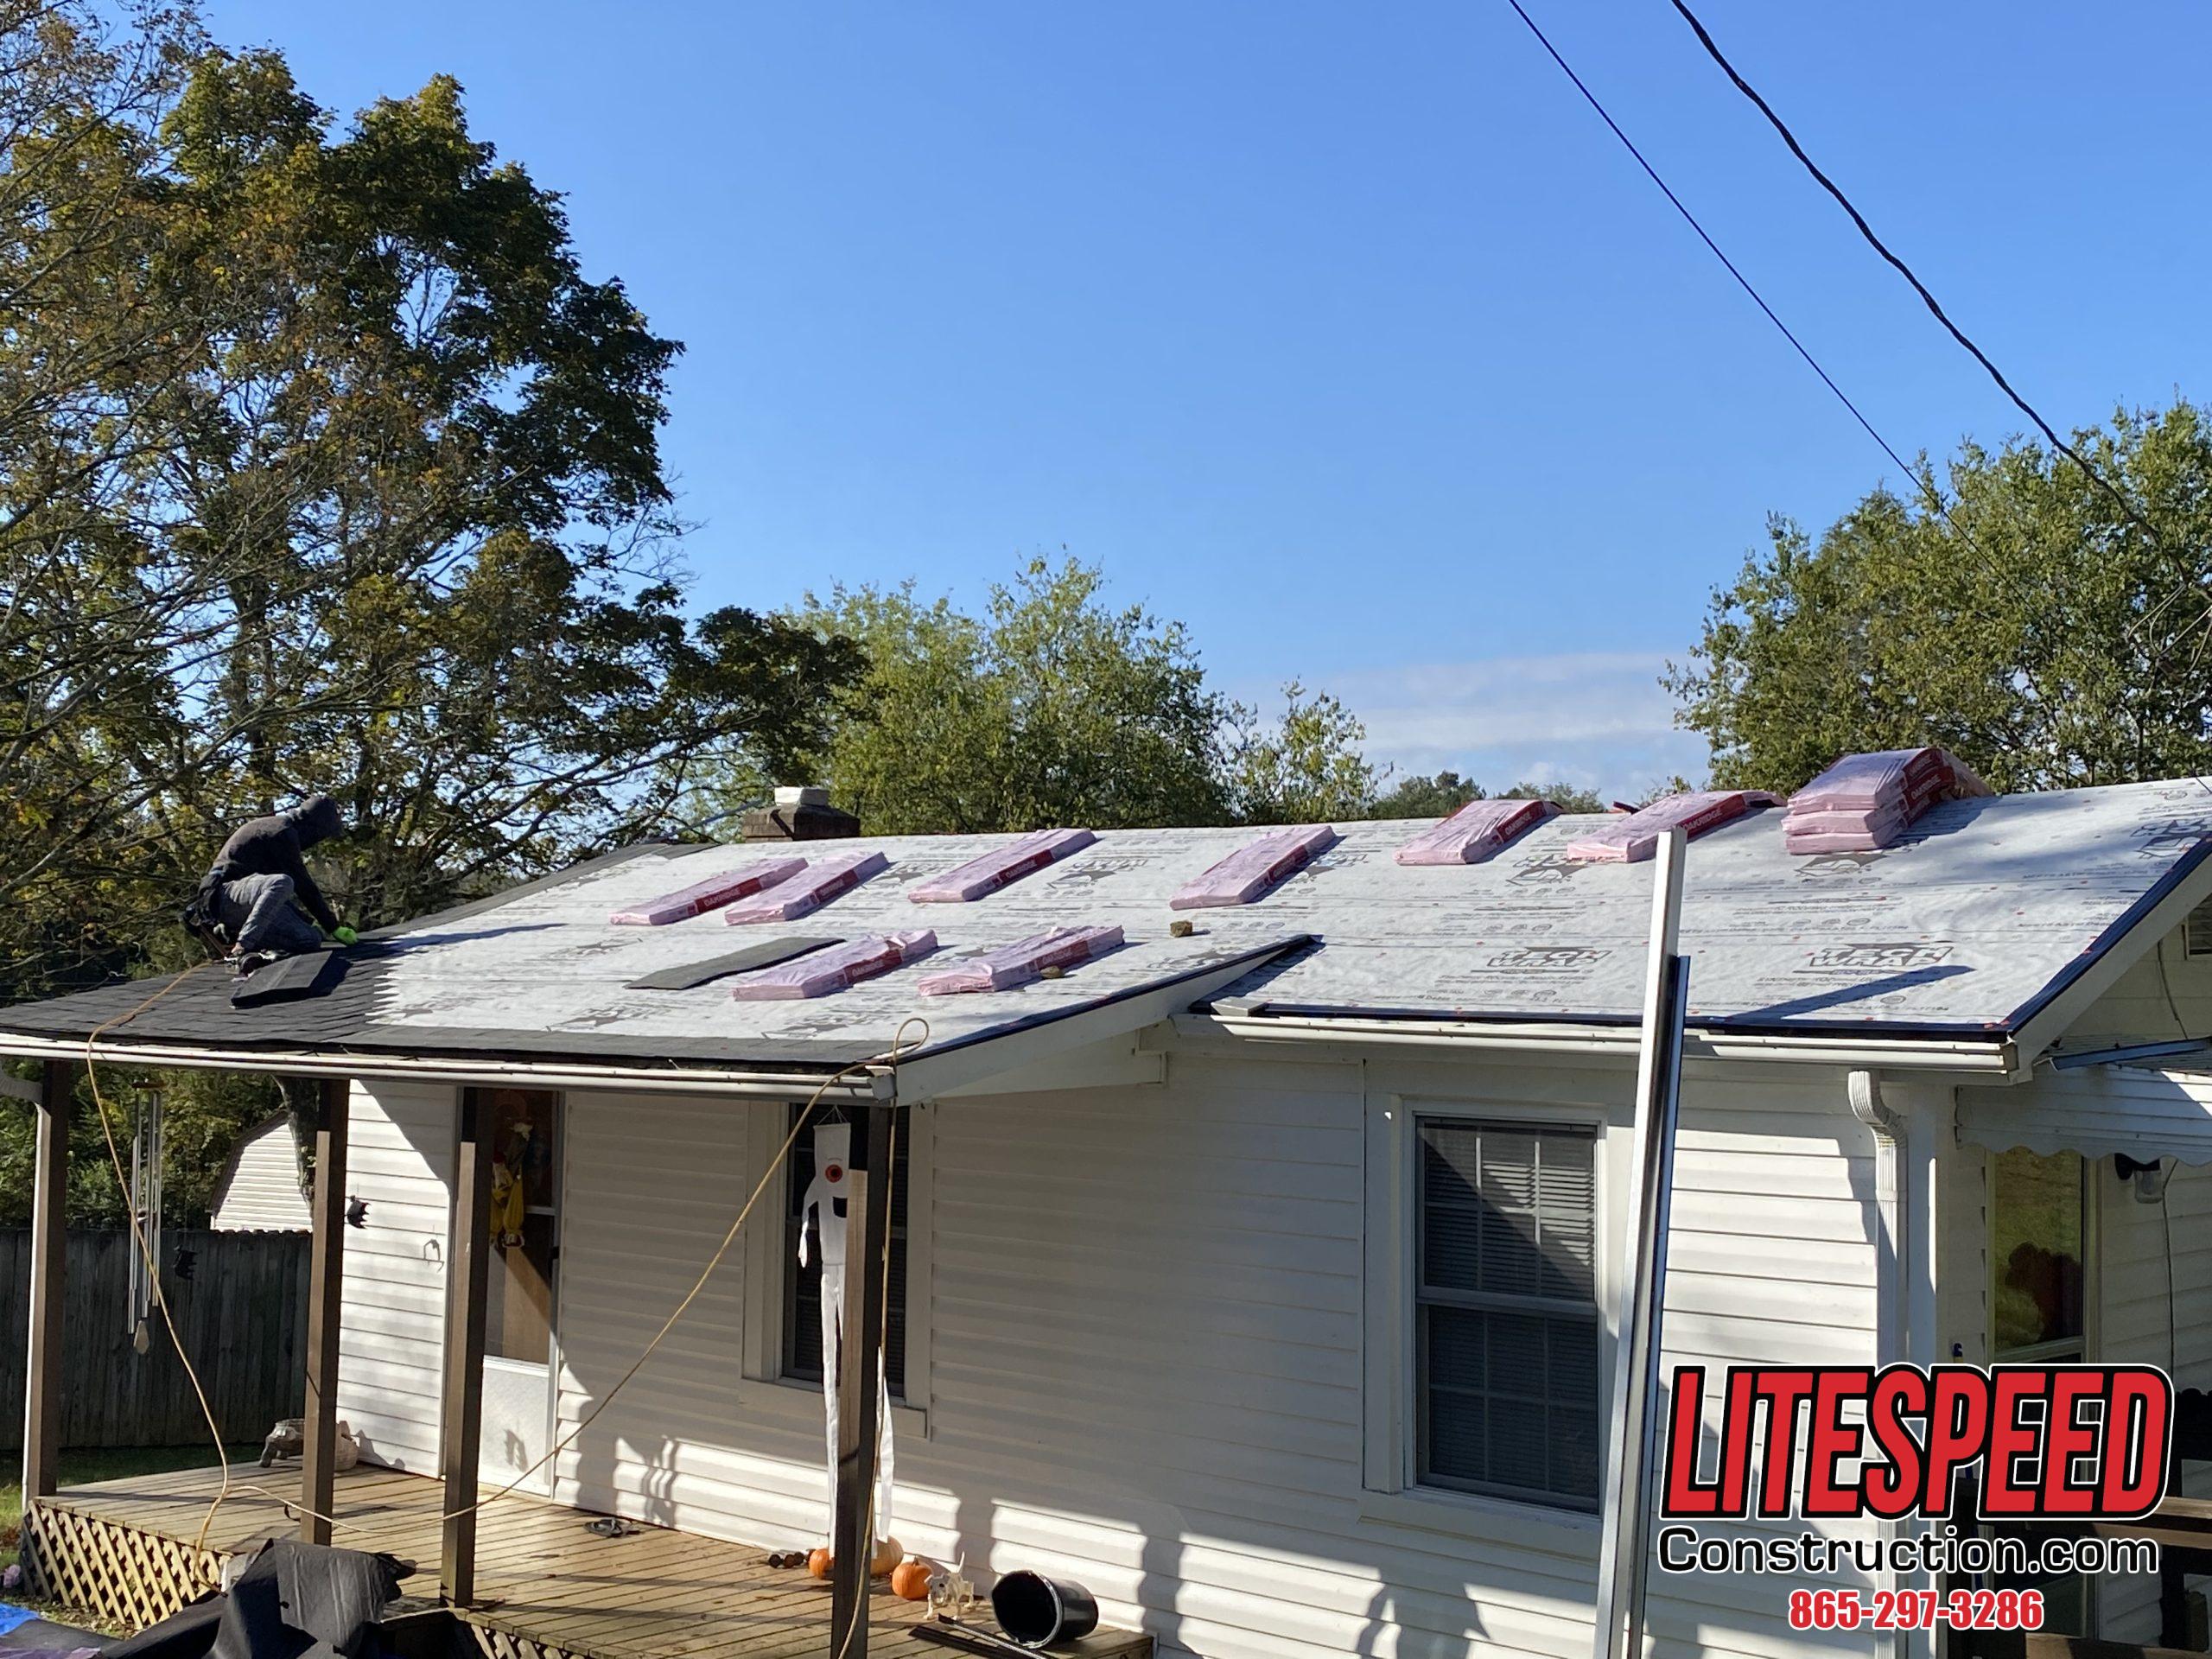 THis is a picture of a new roof being installed with shingles at the top of the roof